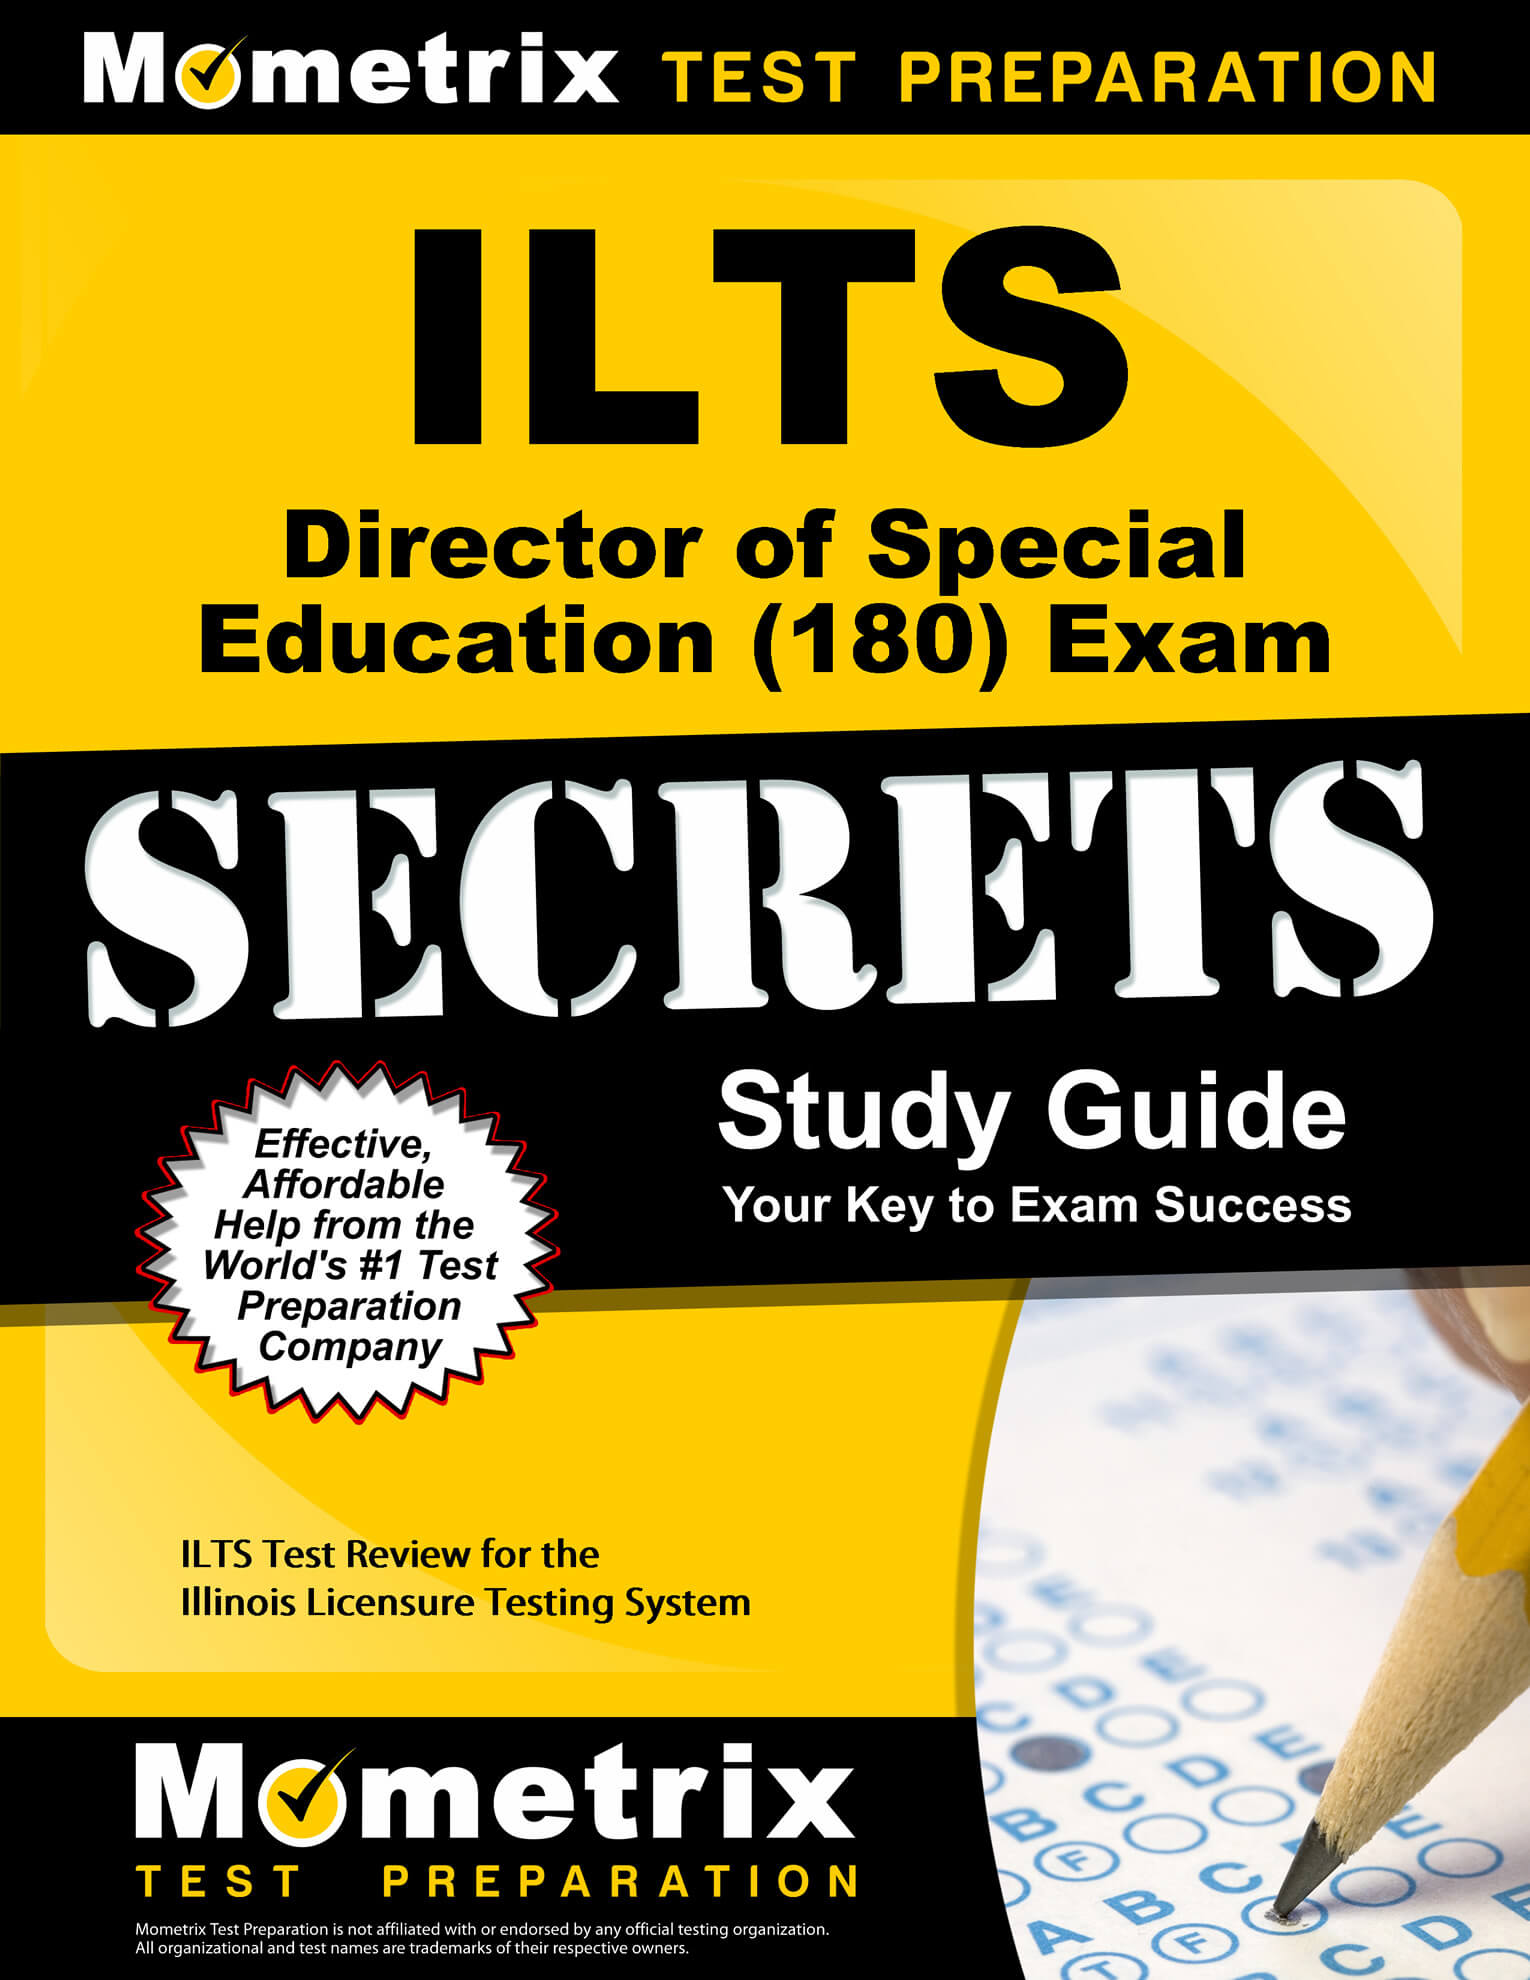 ILTS Director of Special Education Study Guide